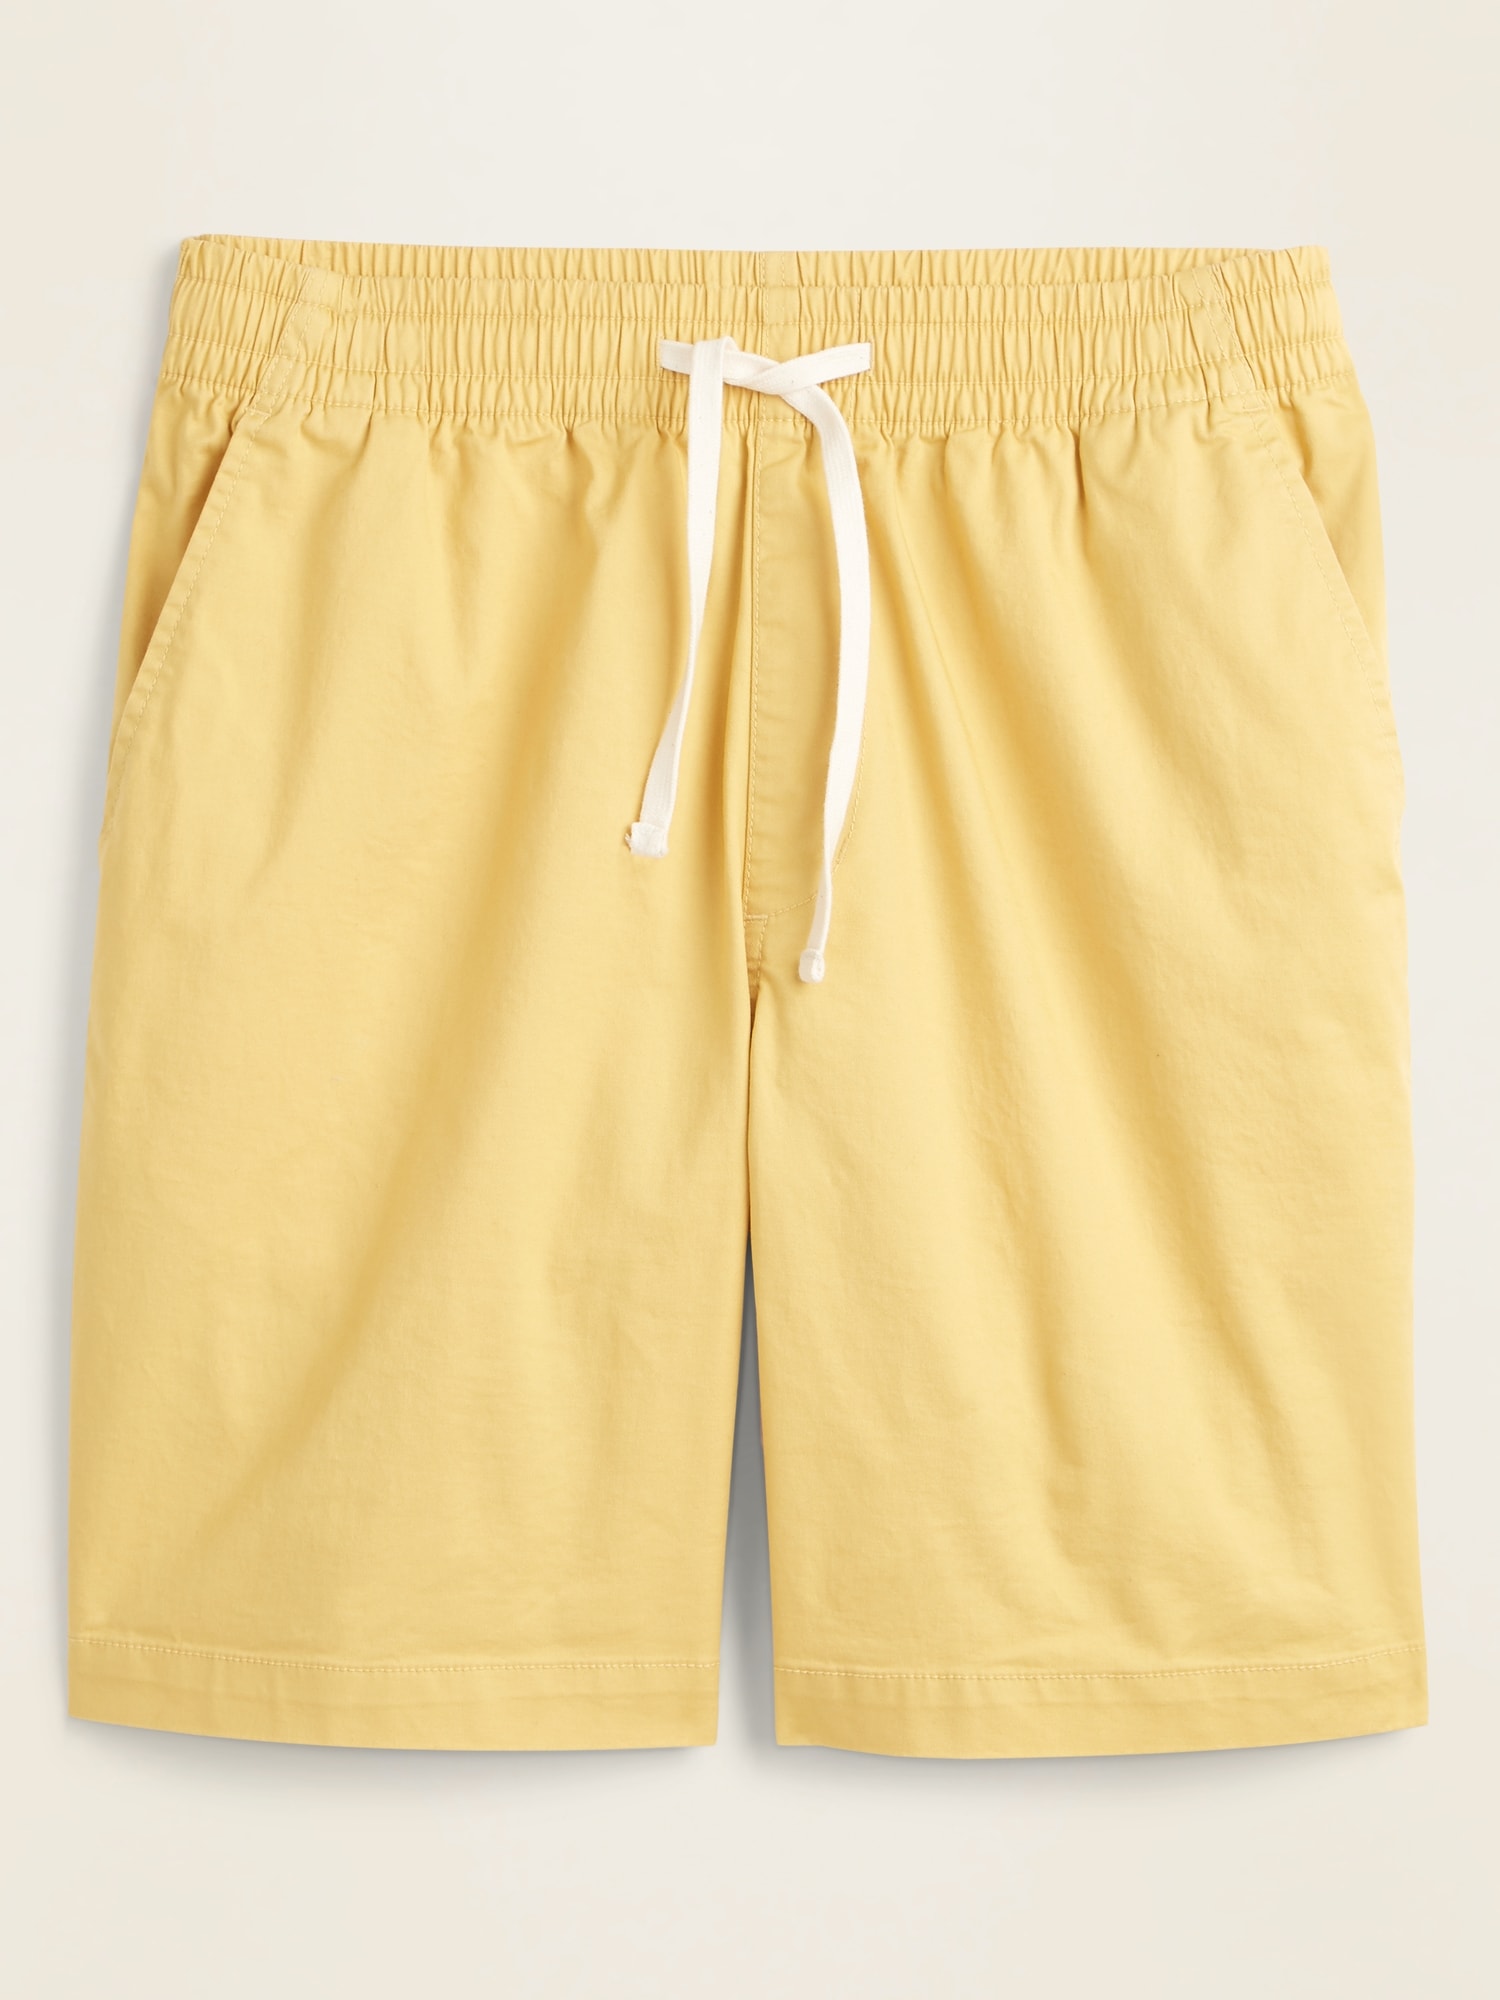 Twill Jogger Shorts for Men - 9-inch inseam | Old Navy